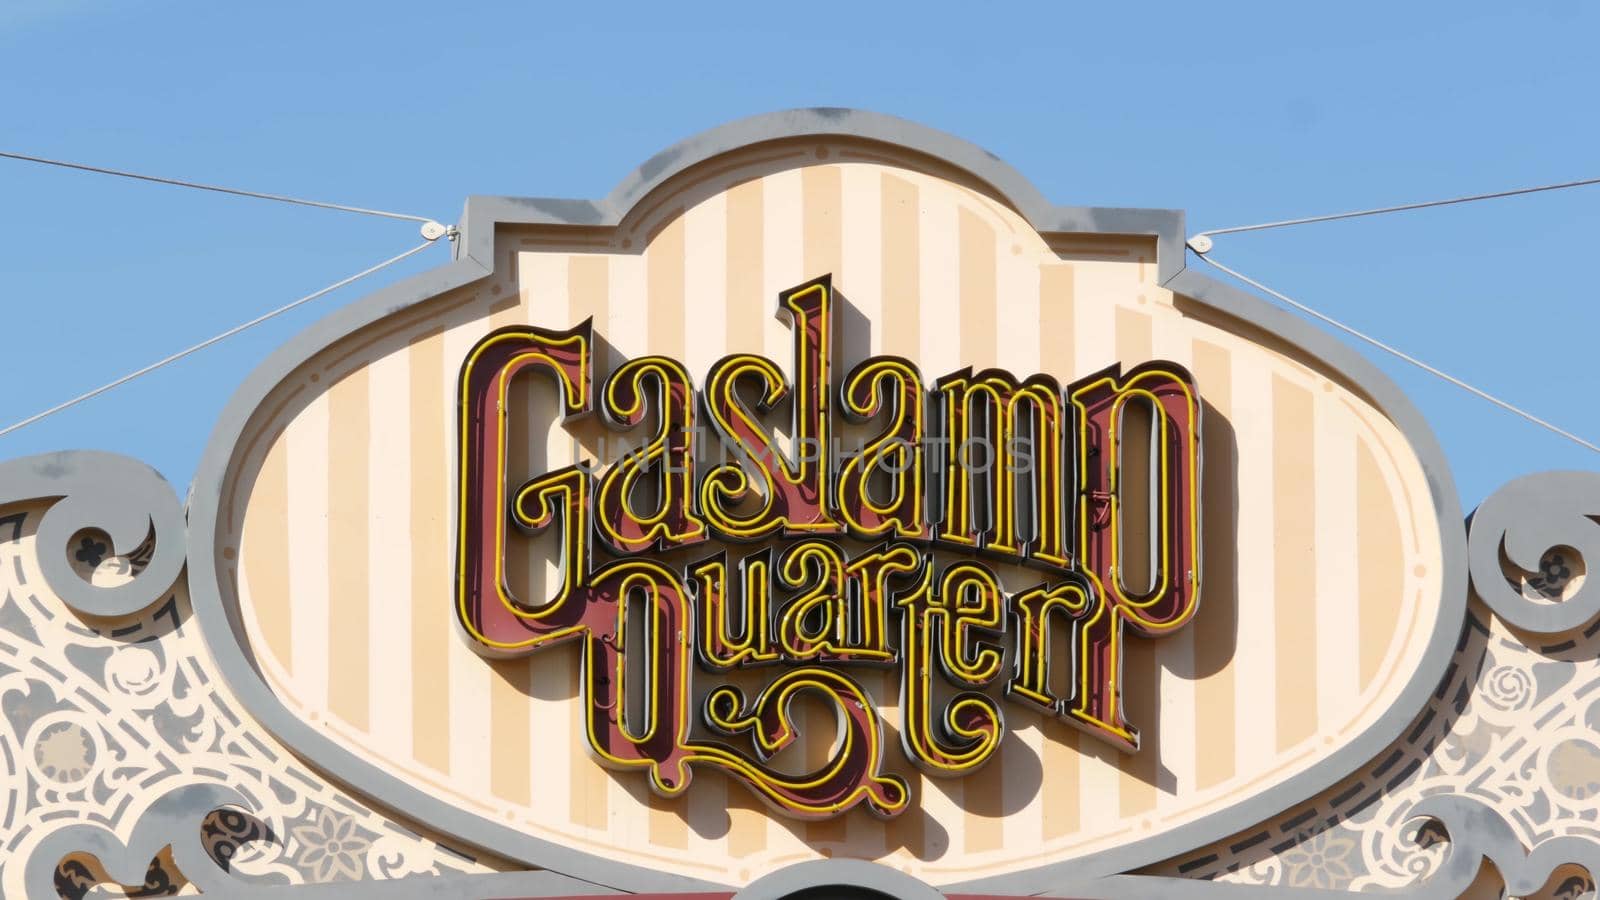 SAN DIEGO, CALIFORNIA USA - 13 FEB 2020: Gaslamp Quarter historic entrance arch sign. Retro signboard on 5th ave. Iconic vintage signage, old-fashioned tourist landmark, city symbol and sightseeing by DogoraSun